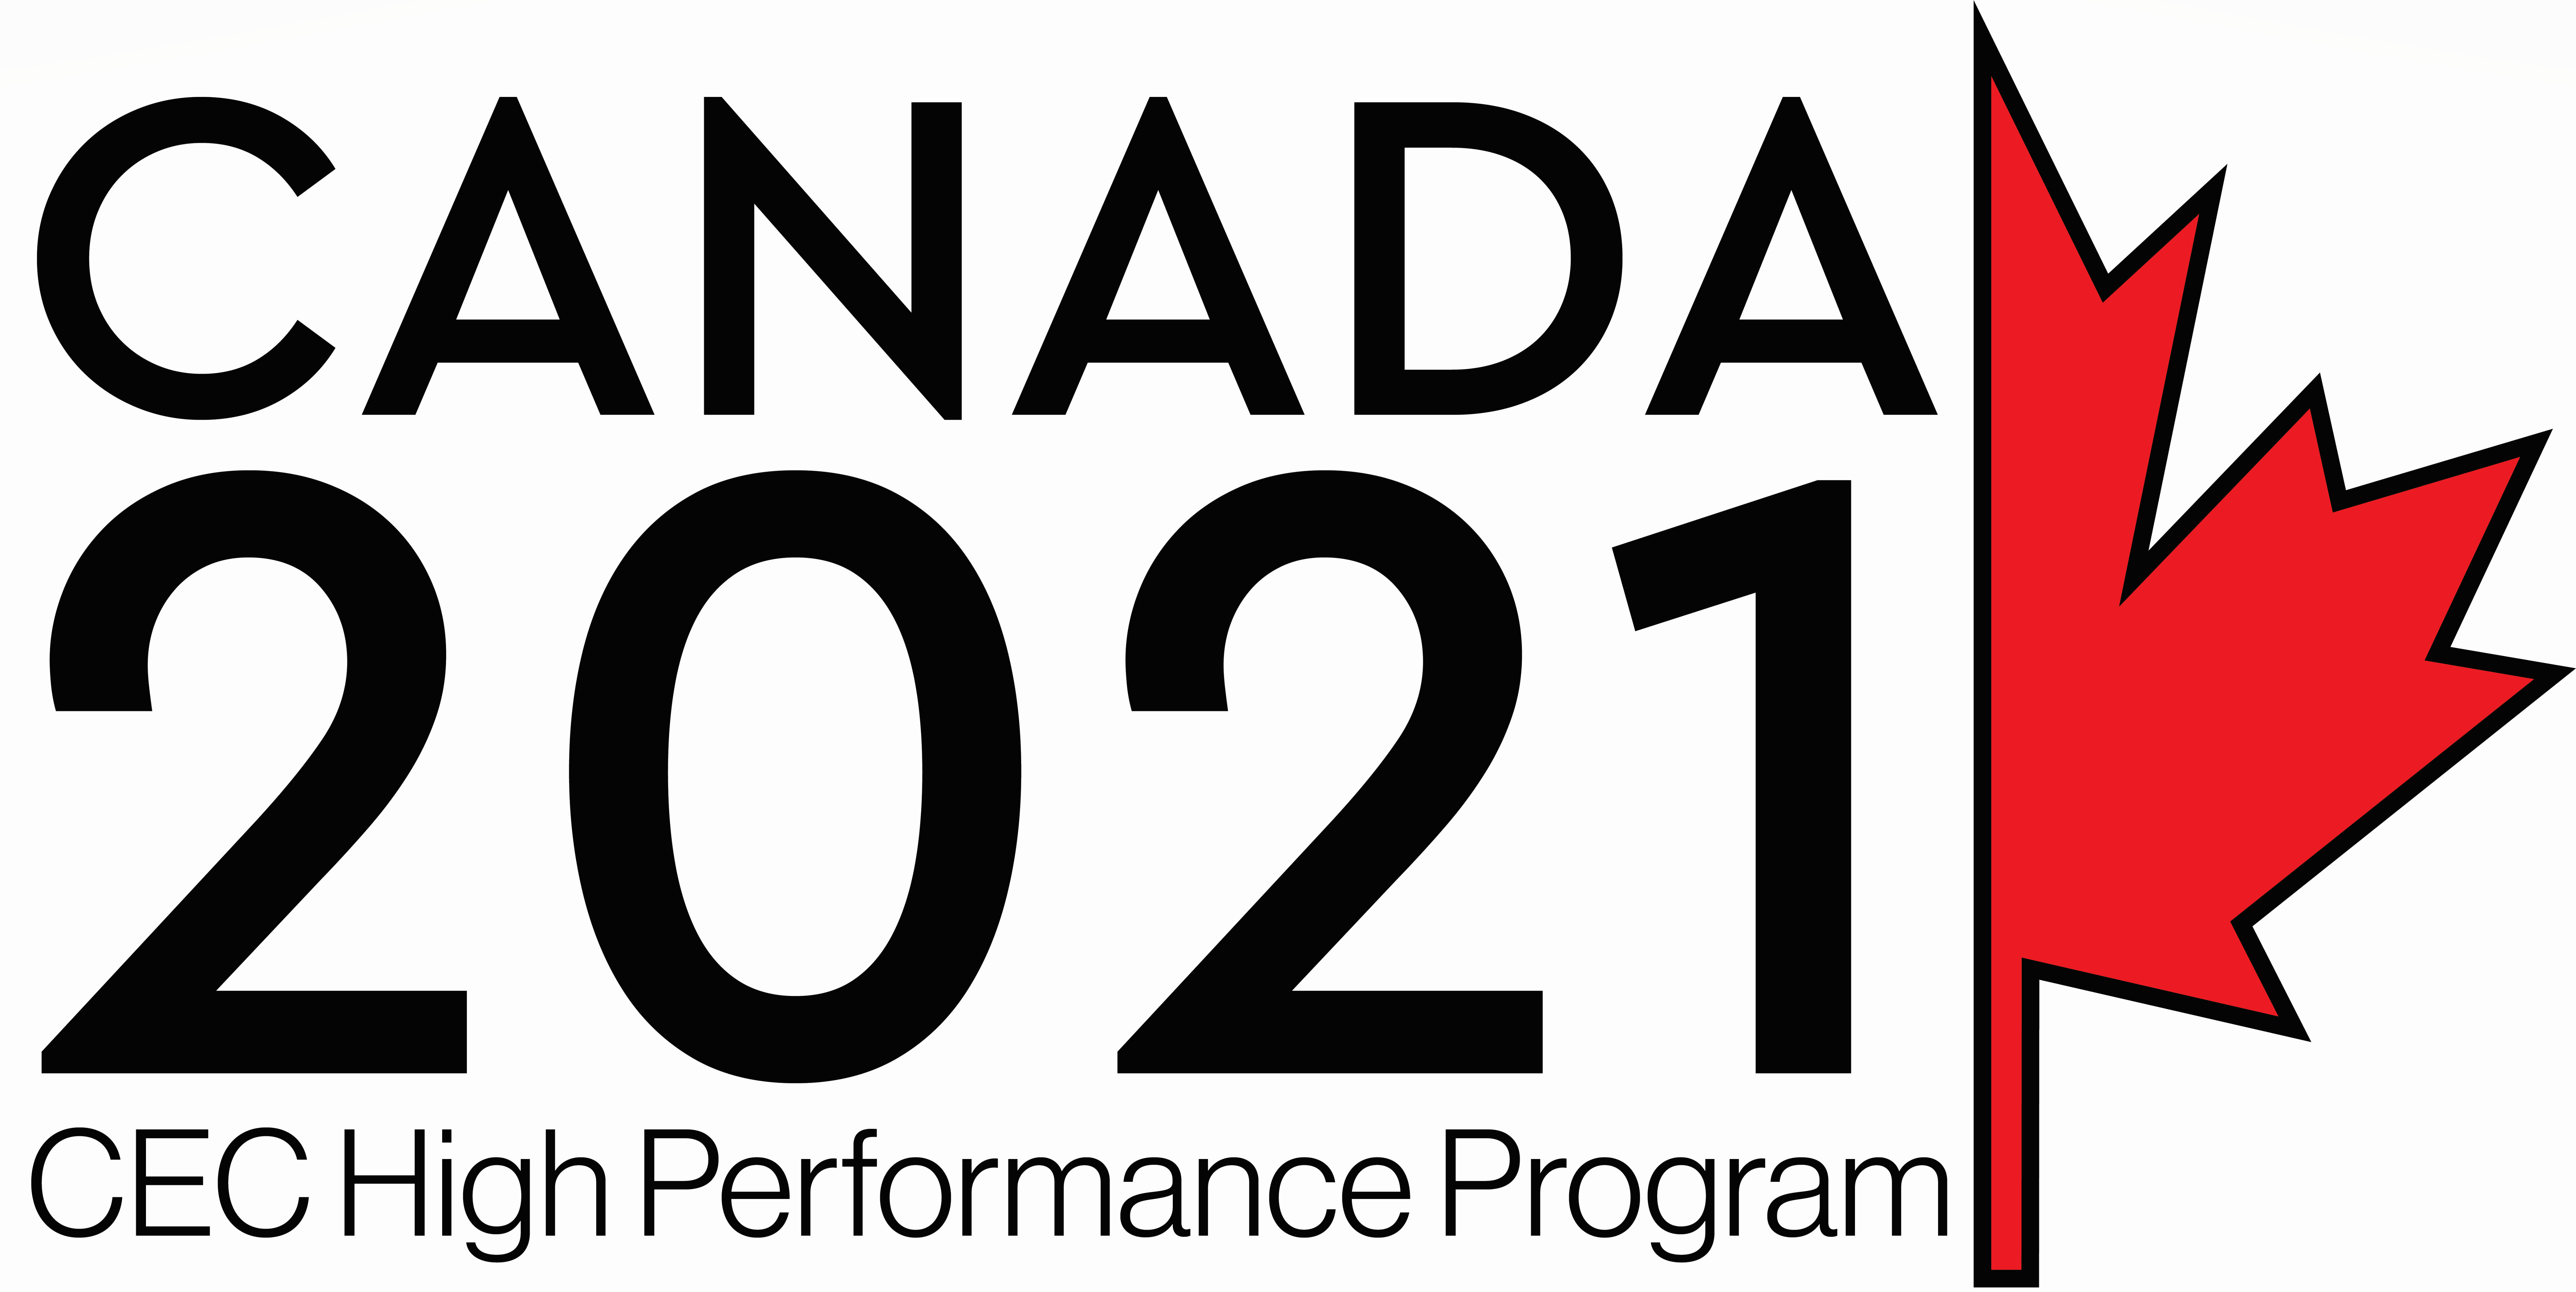 A small contingent of Canadian athletes will compete at the IFSC World Cup events in May 2021